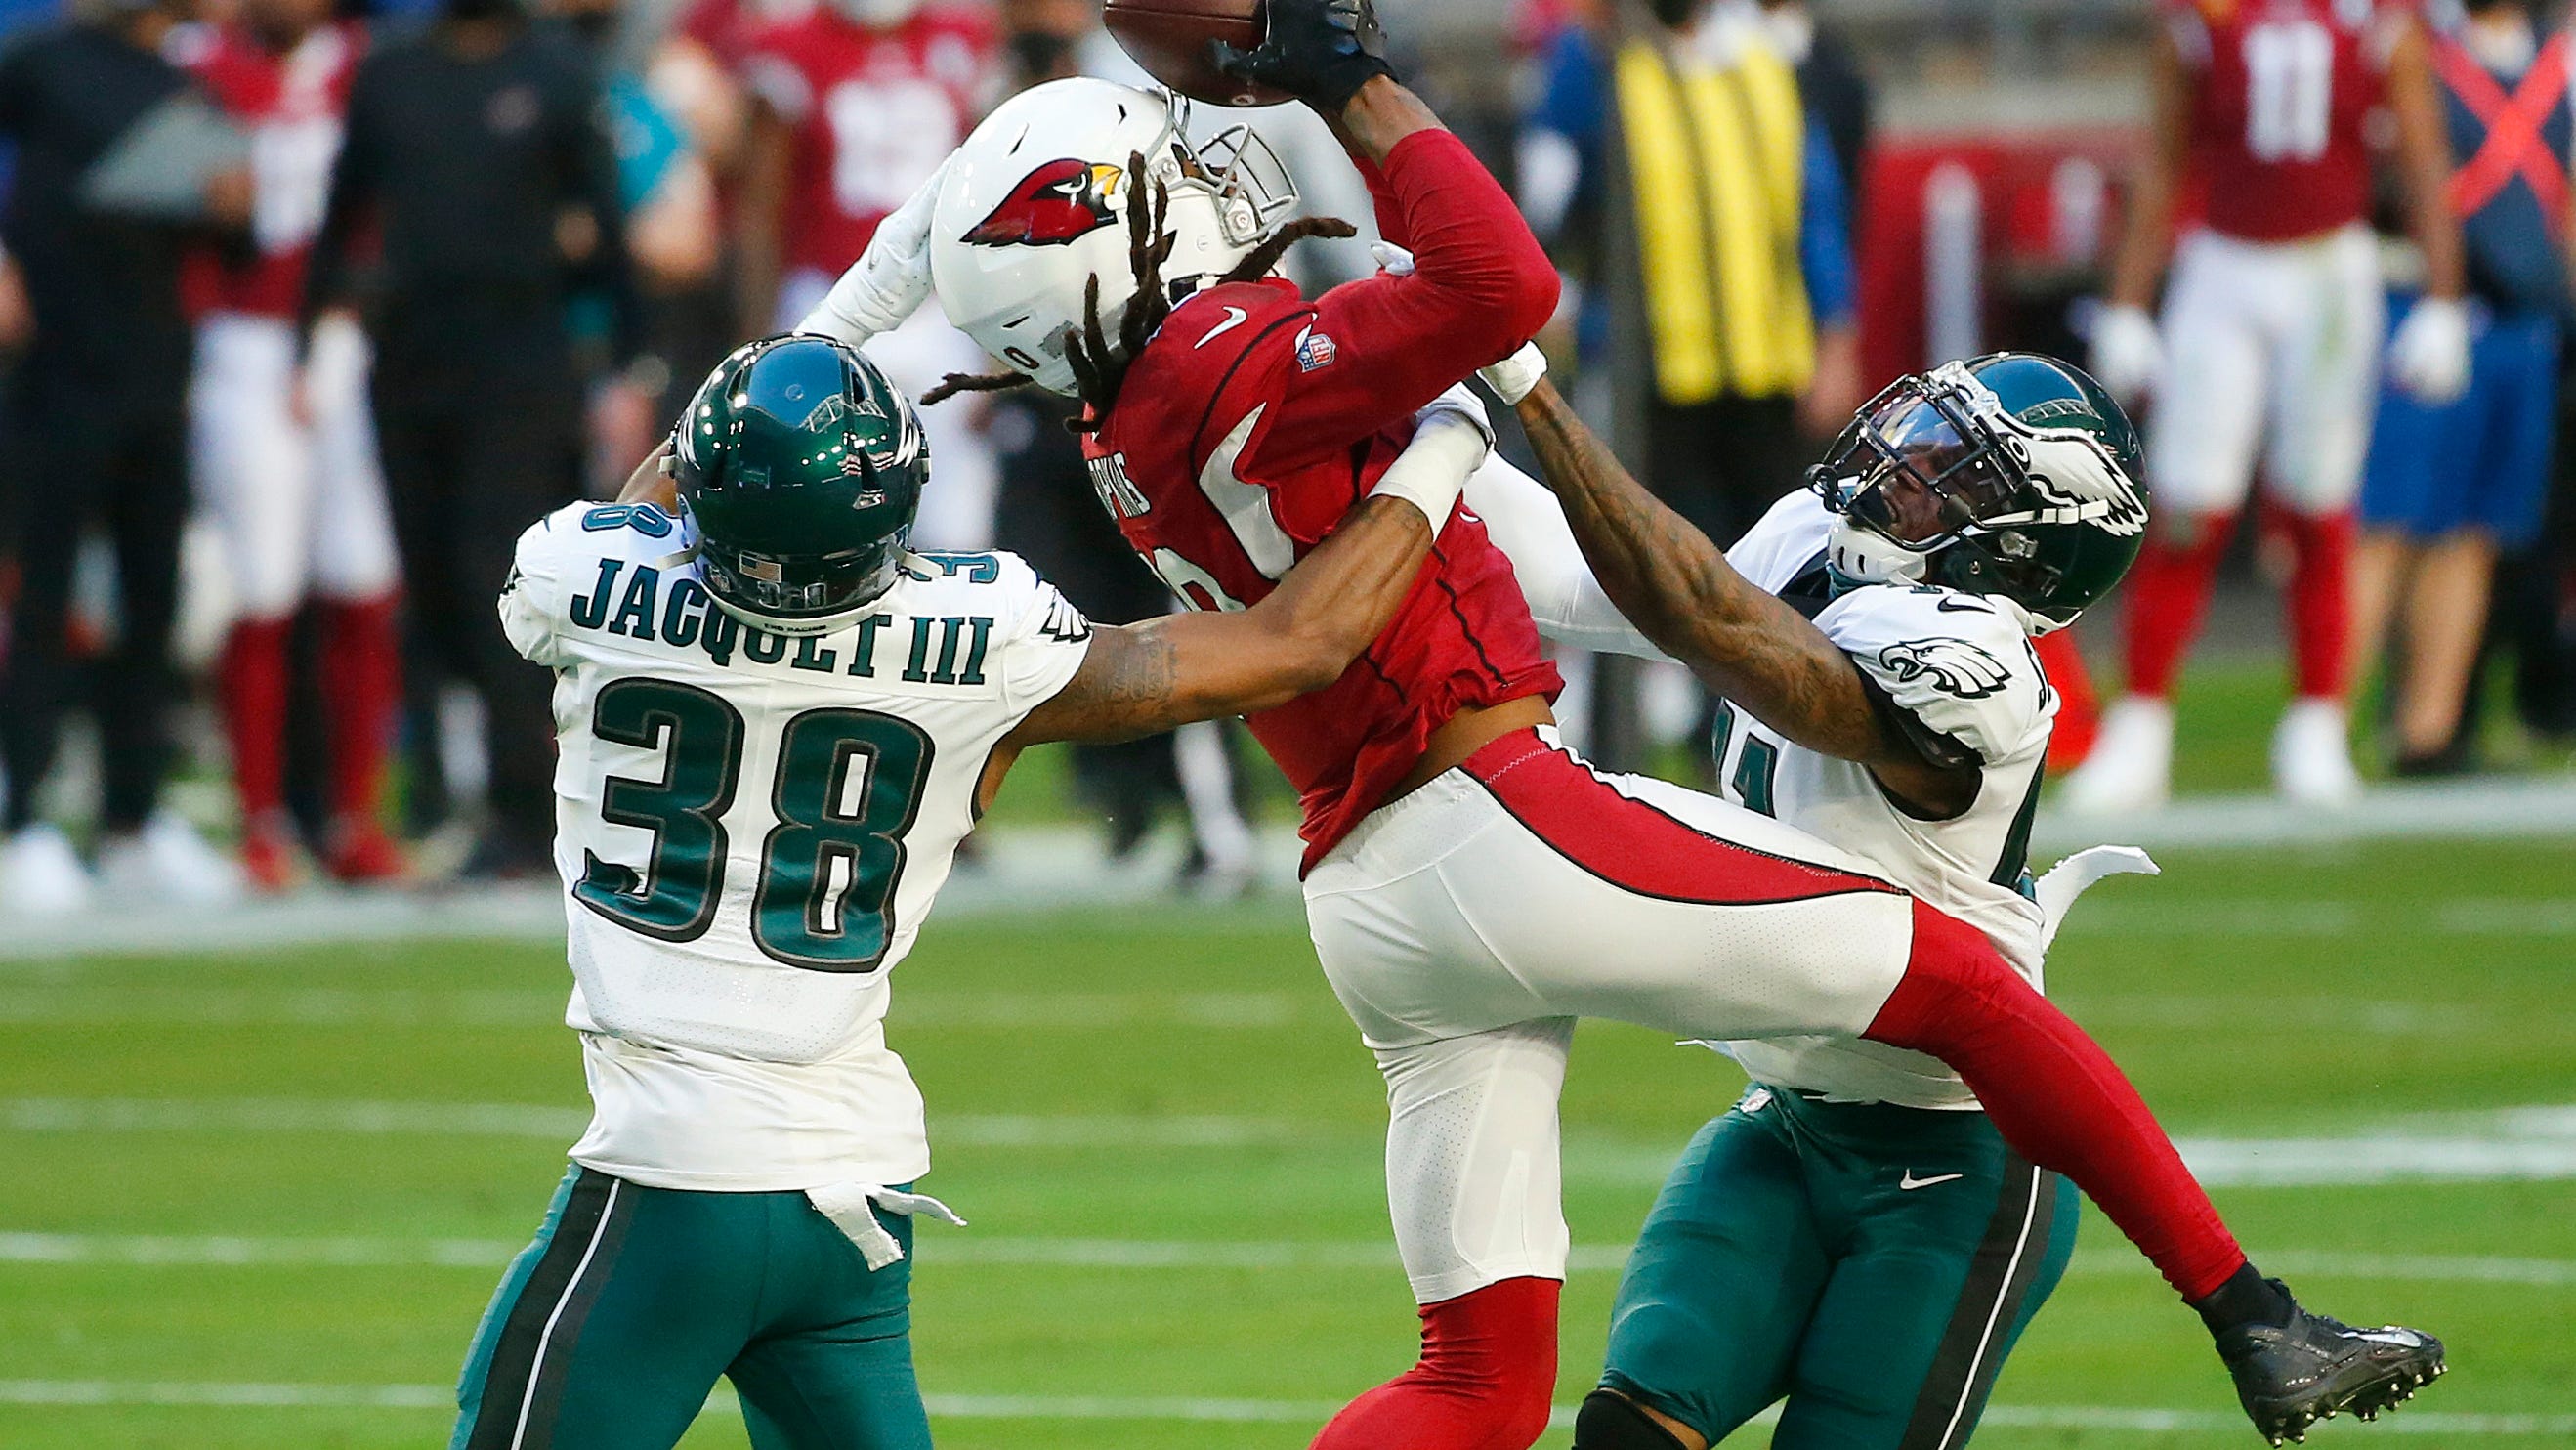 Cardinals WR DeAndre Hopkins practices when he wants, doesn't care what